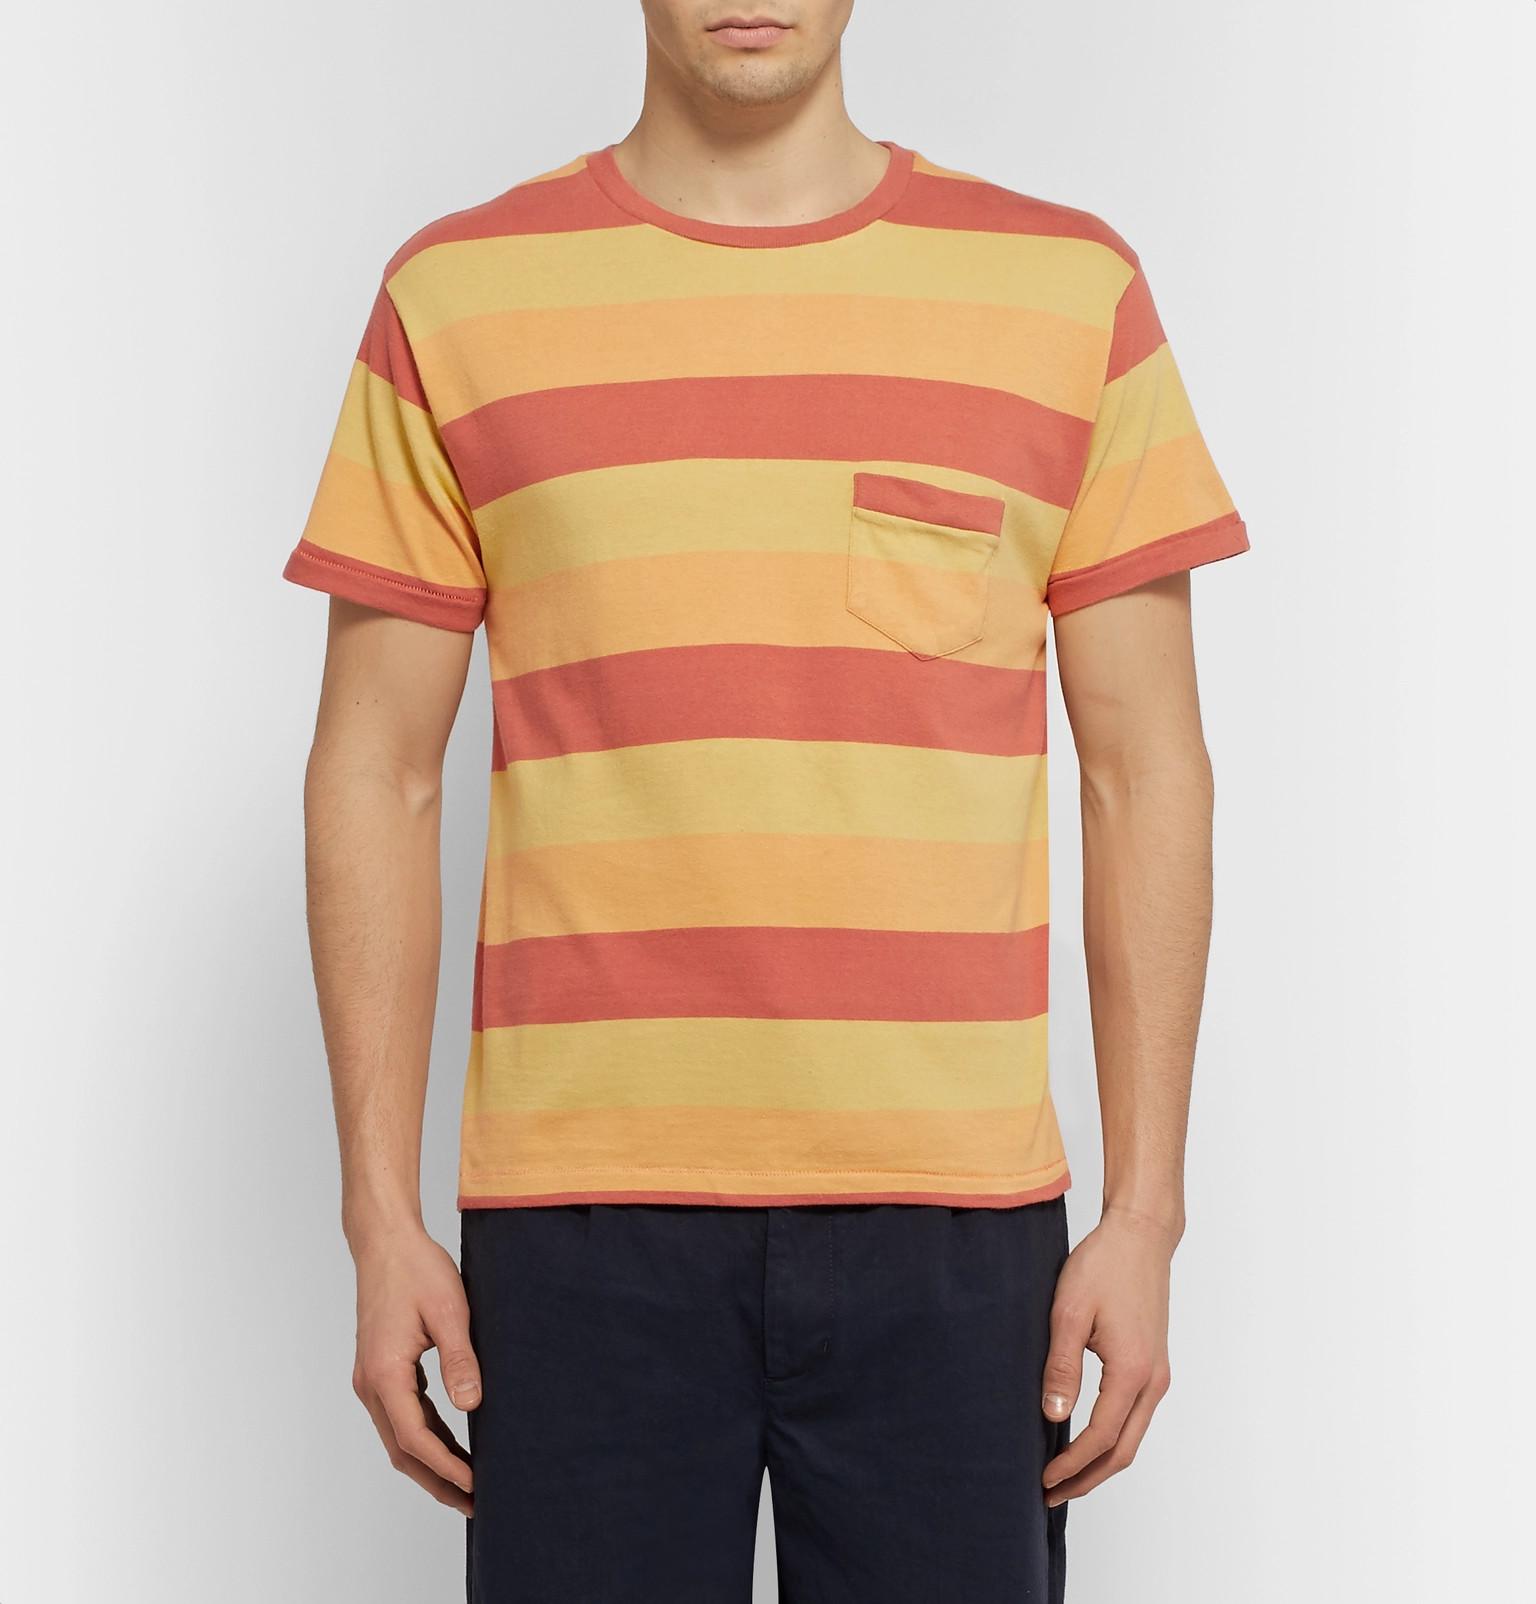 Levi's 1940s Striped Cotton-jersey T-shirt in Orange for Men